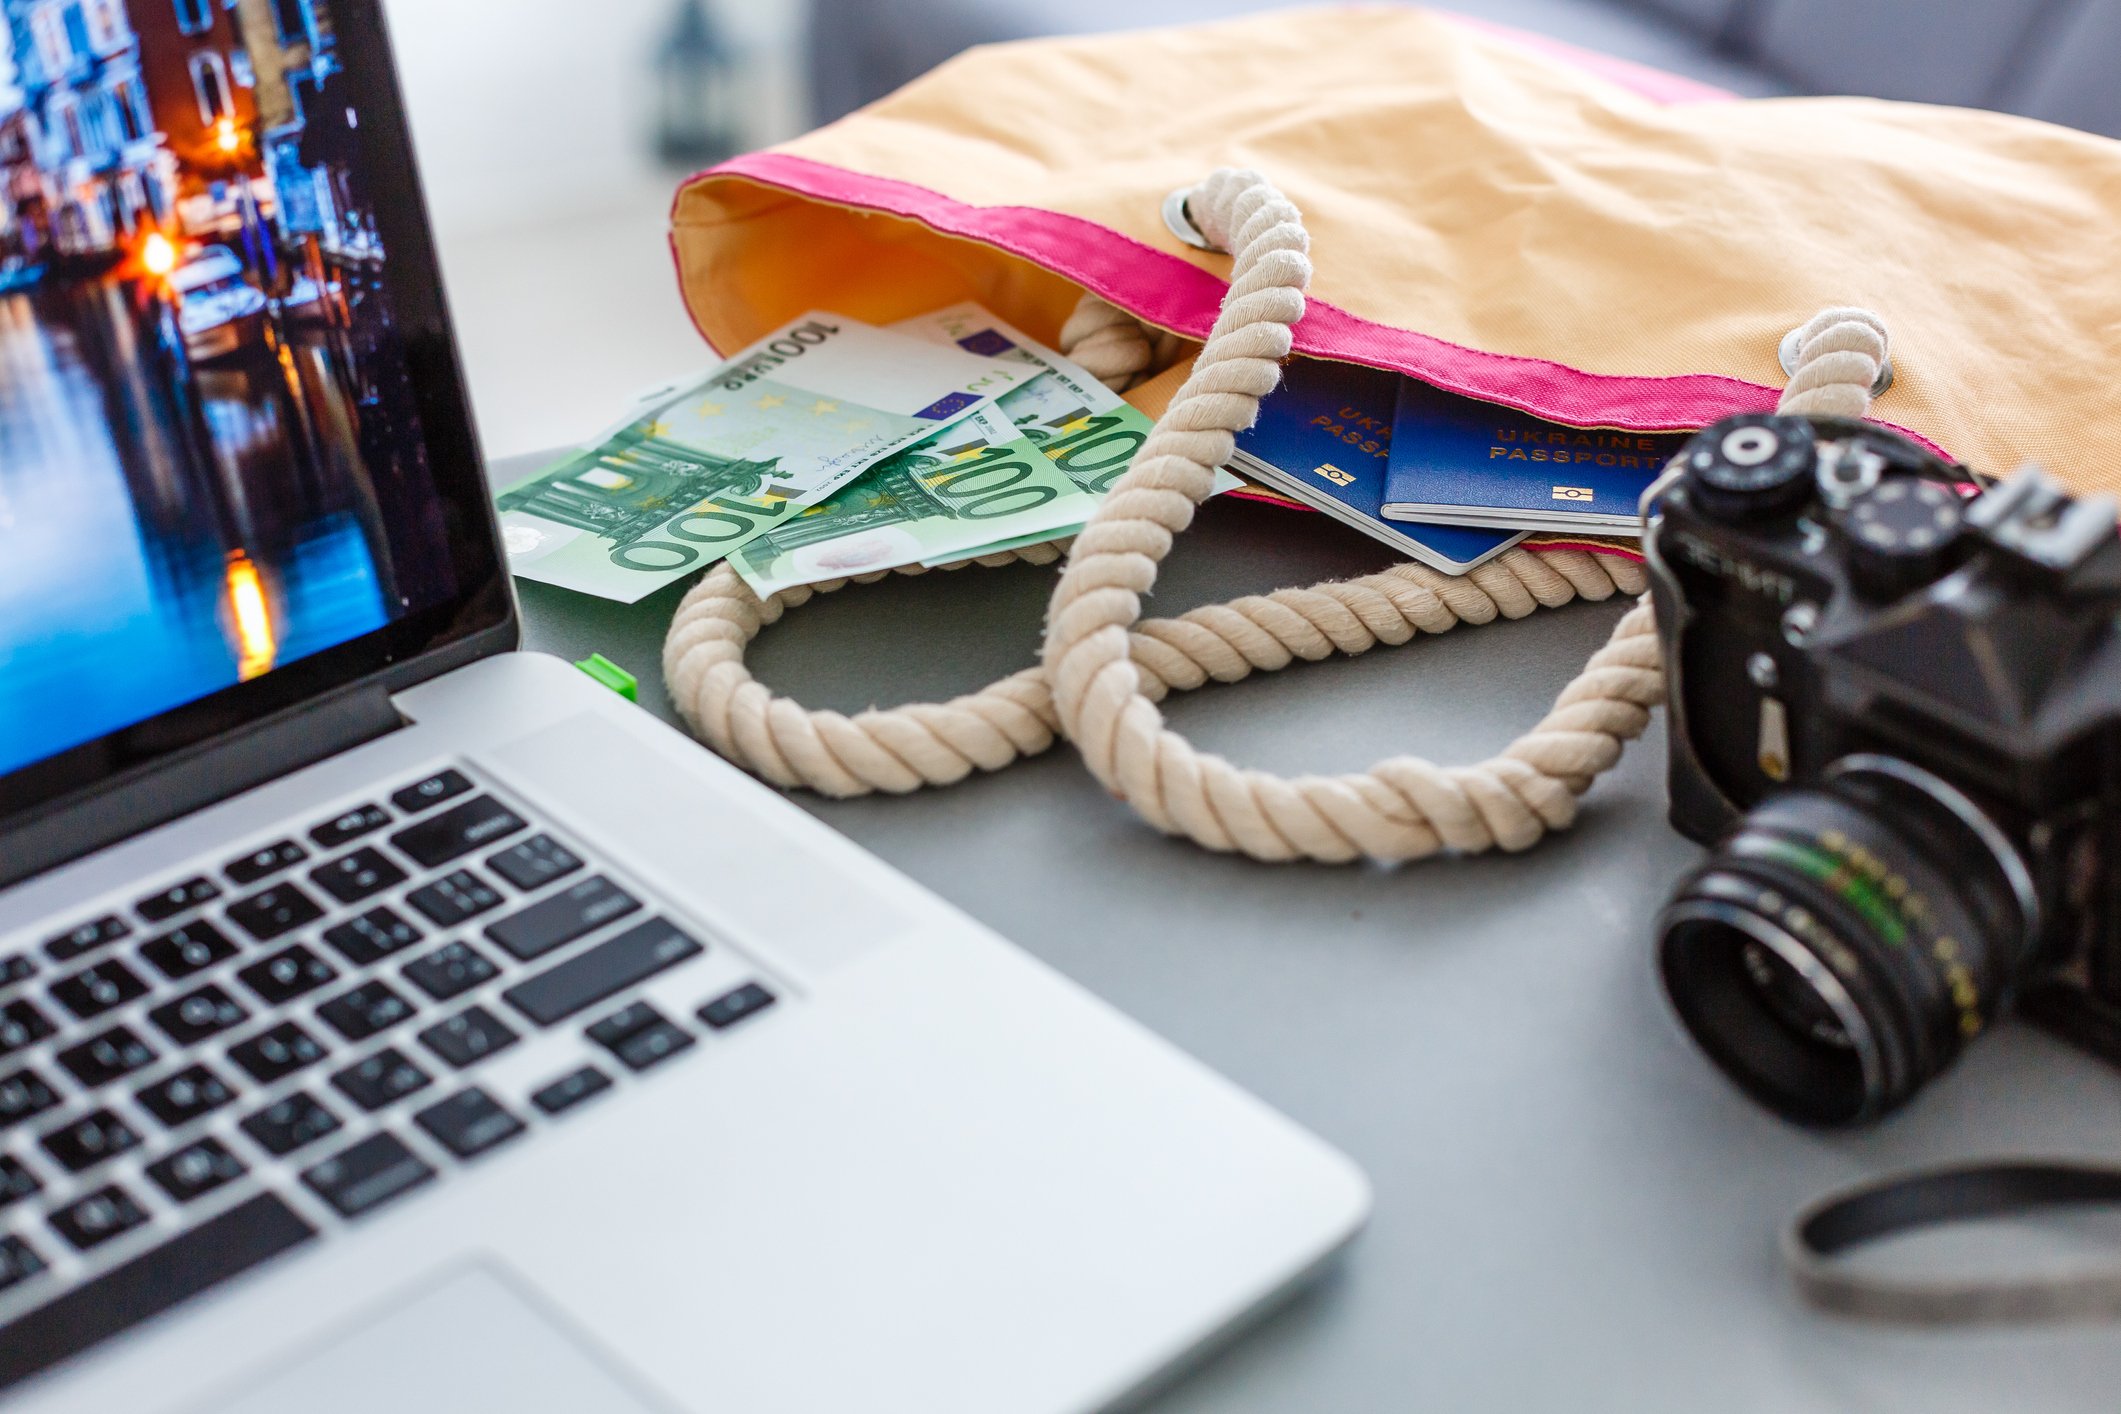 Close up of a laptop, a camera, and a bag with money and passports inside.